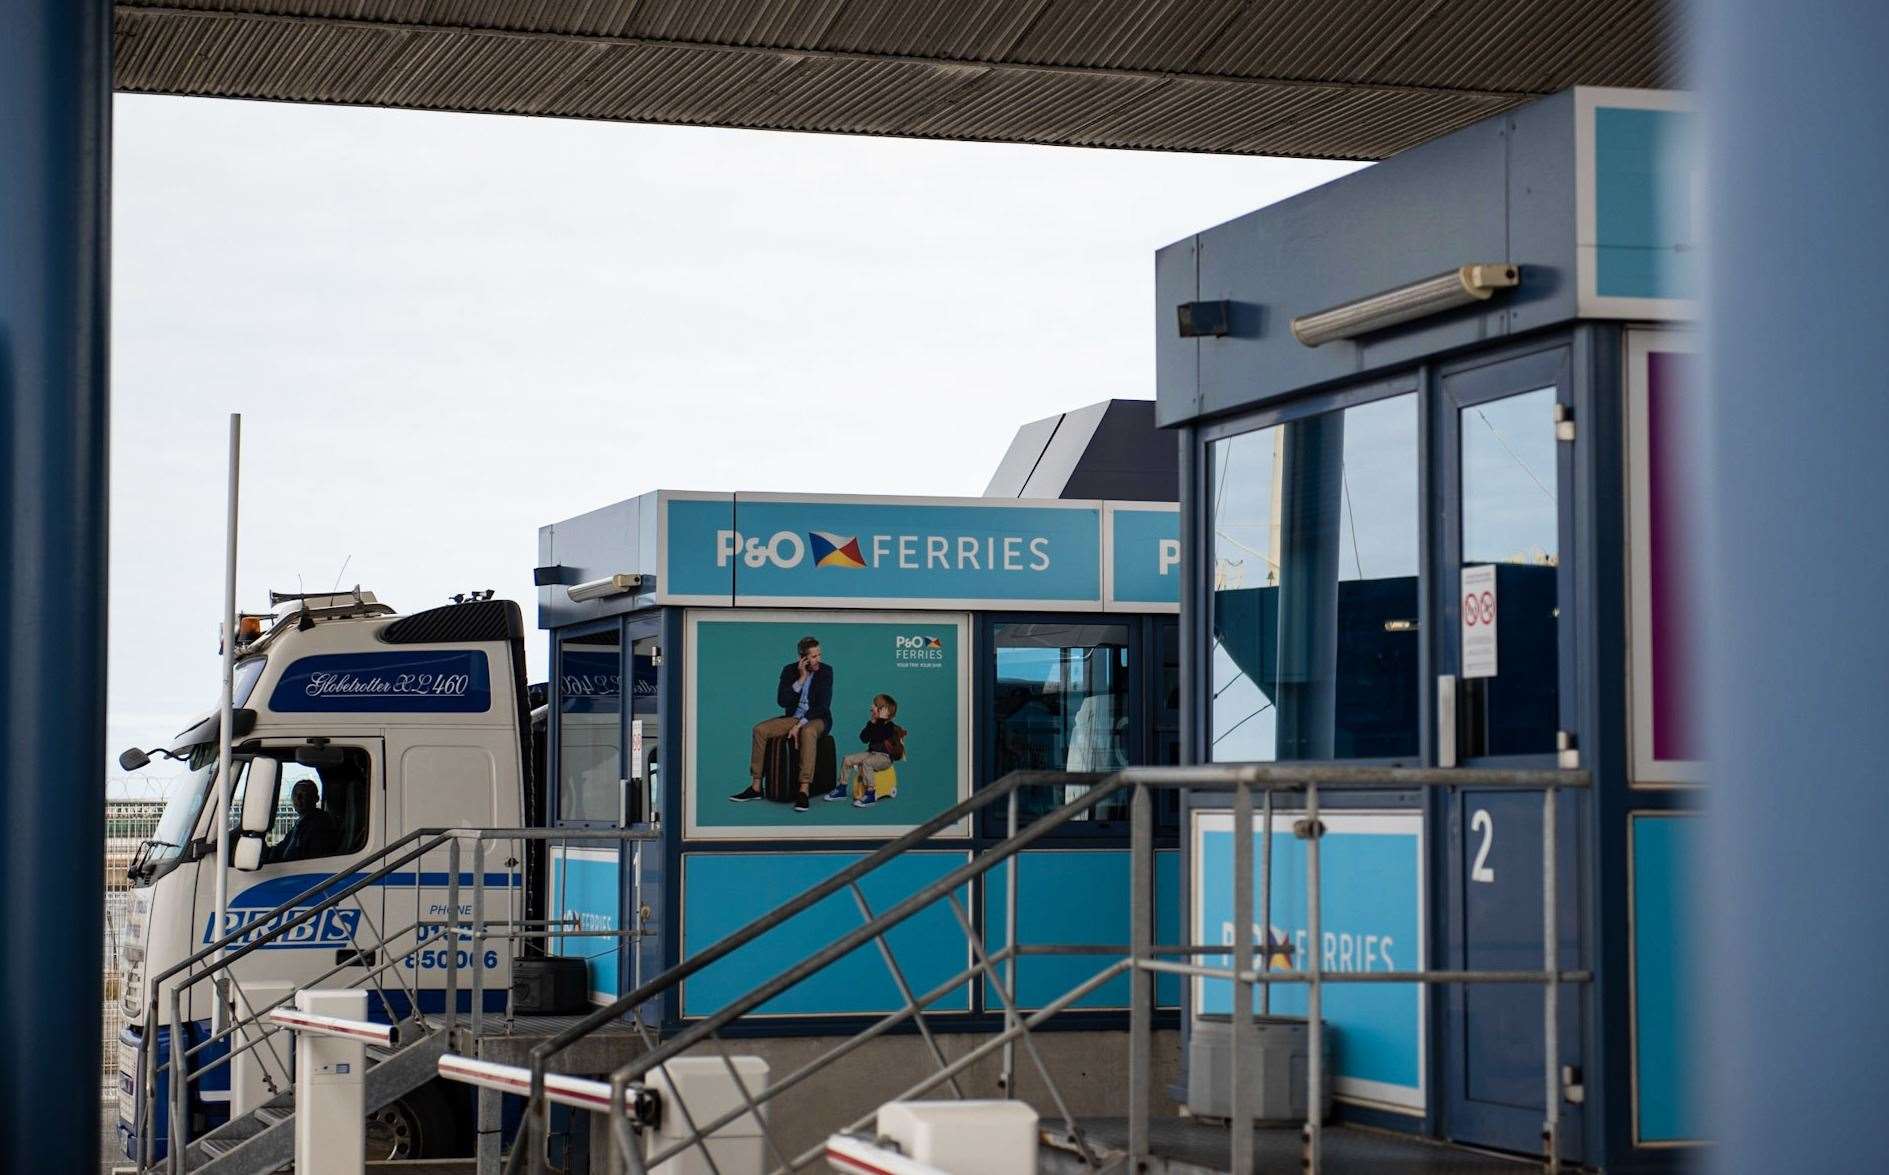 P&O hopes its new customs clearance centre will help ease import and export challenges